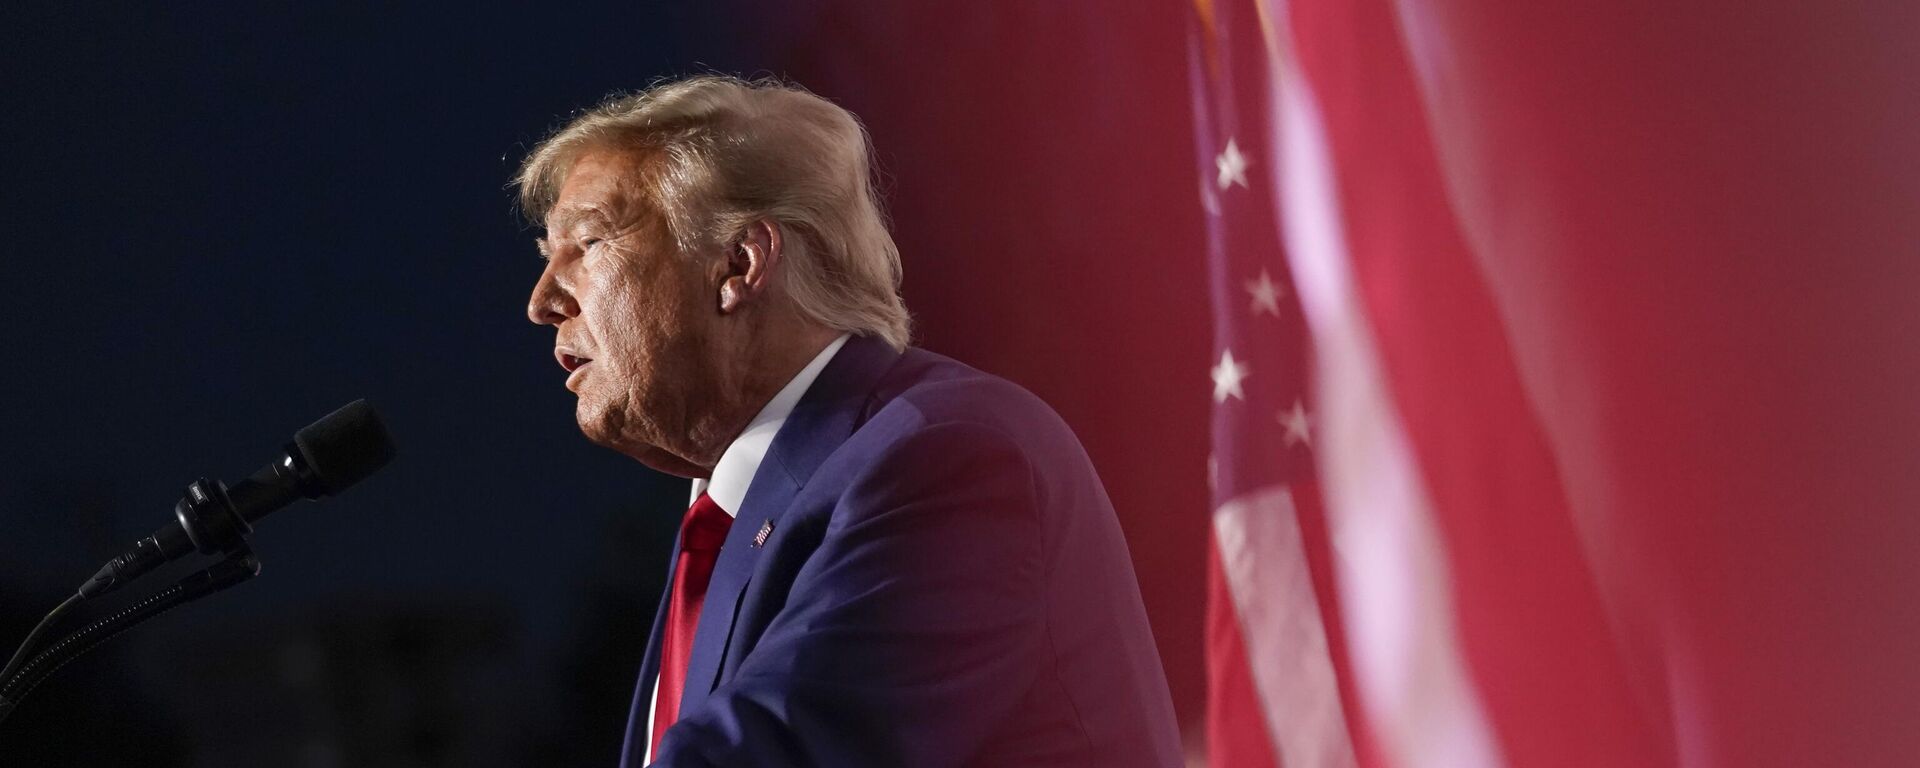 Former President Donald Trump speaks at Trump National Golf Club in Bedminster, N.J., Tuesday, June 13, 2023, after pleading not guilty in a Miami courtroom earlier in the day to dozens of felony counts that he hoarded classified documents and refused government demands to give them back. - Sputnik International, 1920, 14.06.2023